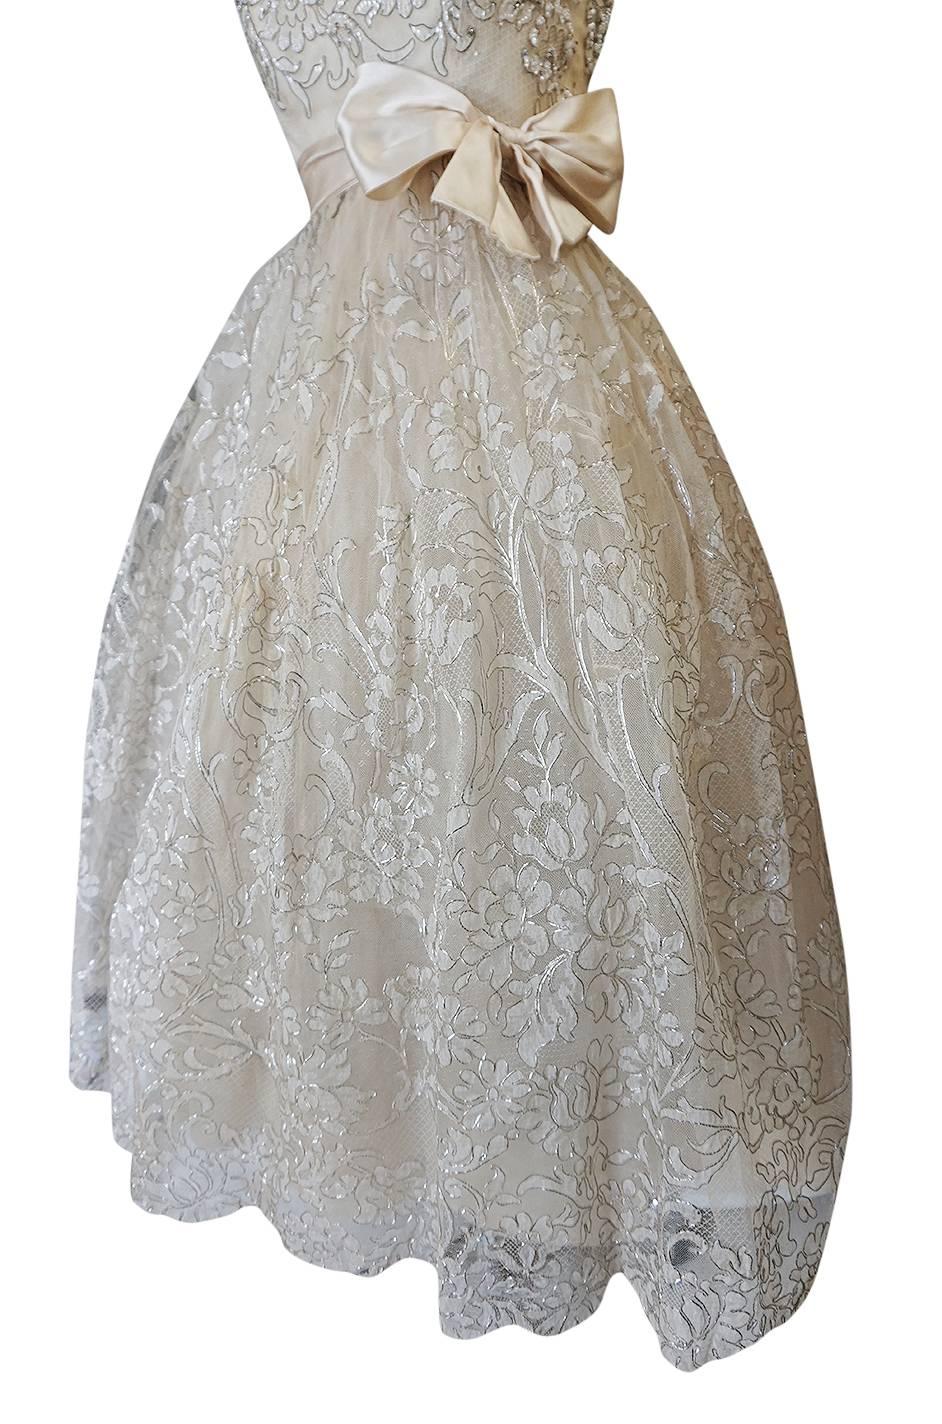 Spring 1959 Christian Dior Haute Couture Ivory & Silver Lace Dress 2